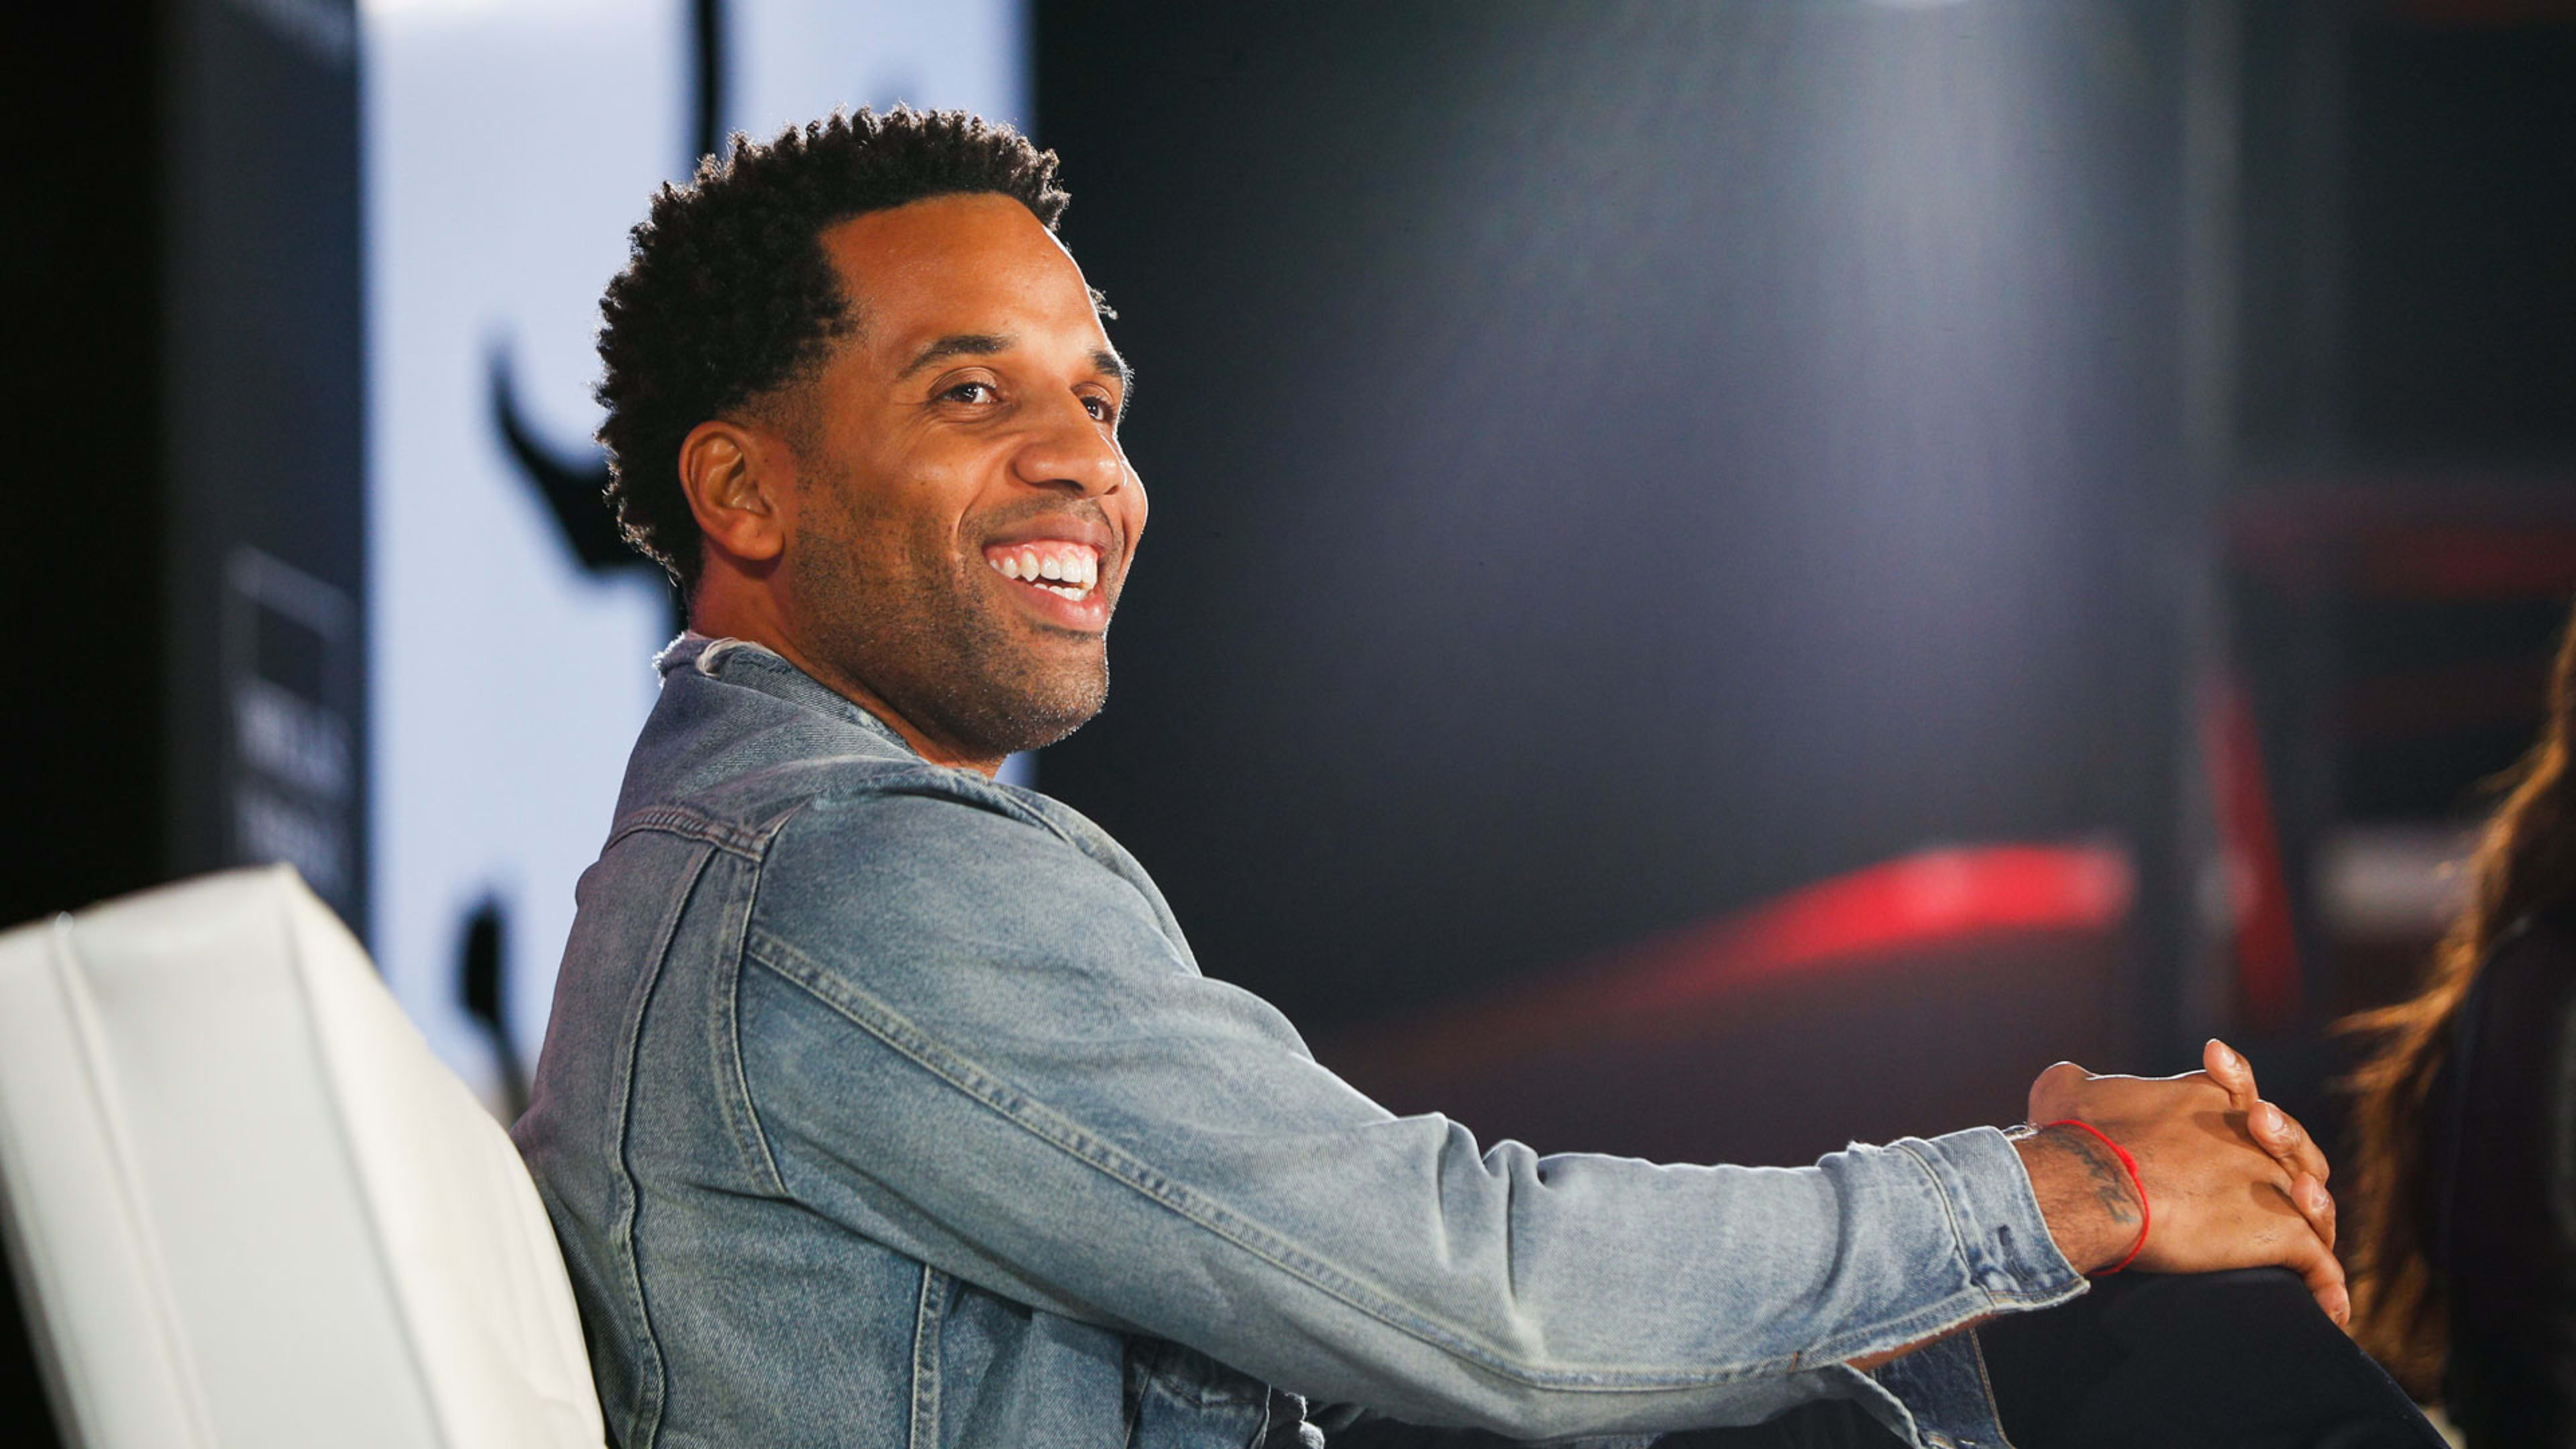 Exclusive: Maverick Carter is joining the board of Live Nation